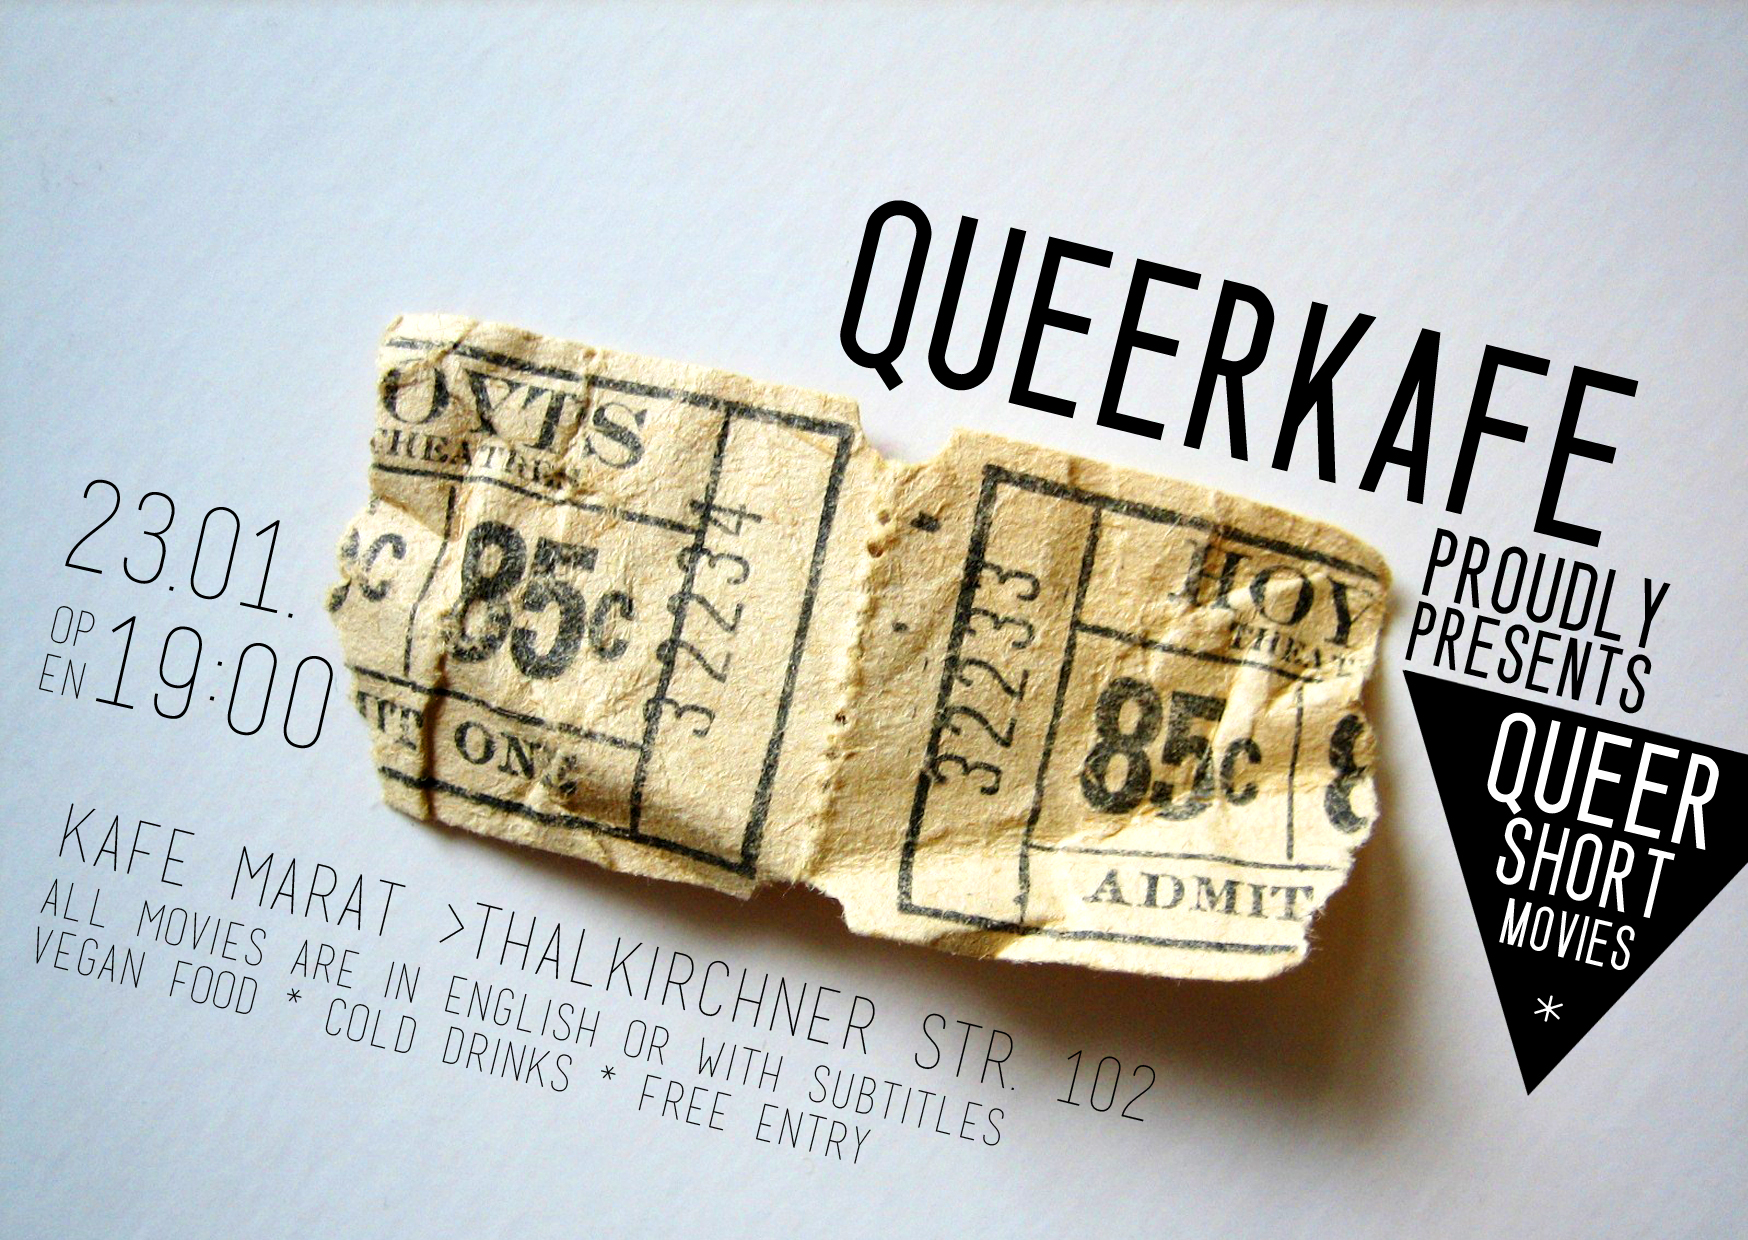 Queer Short Movies